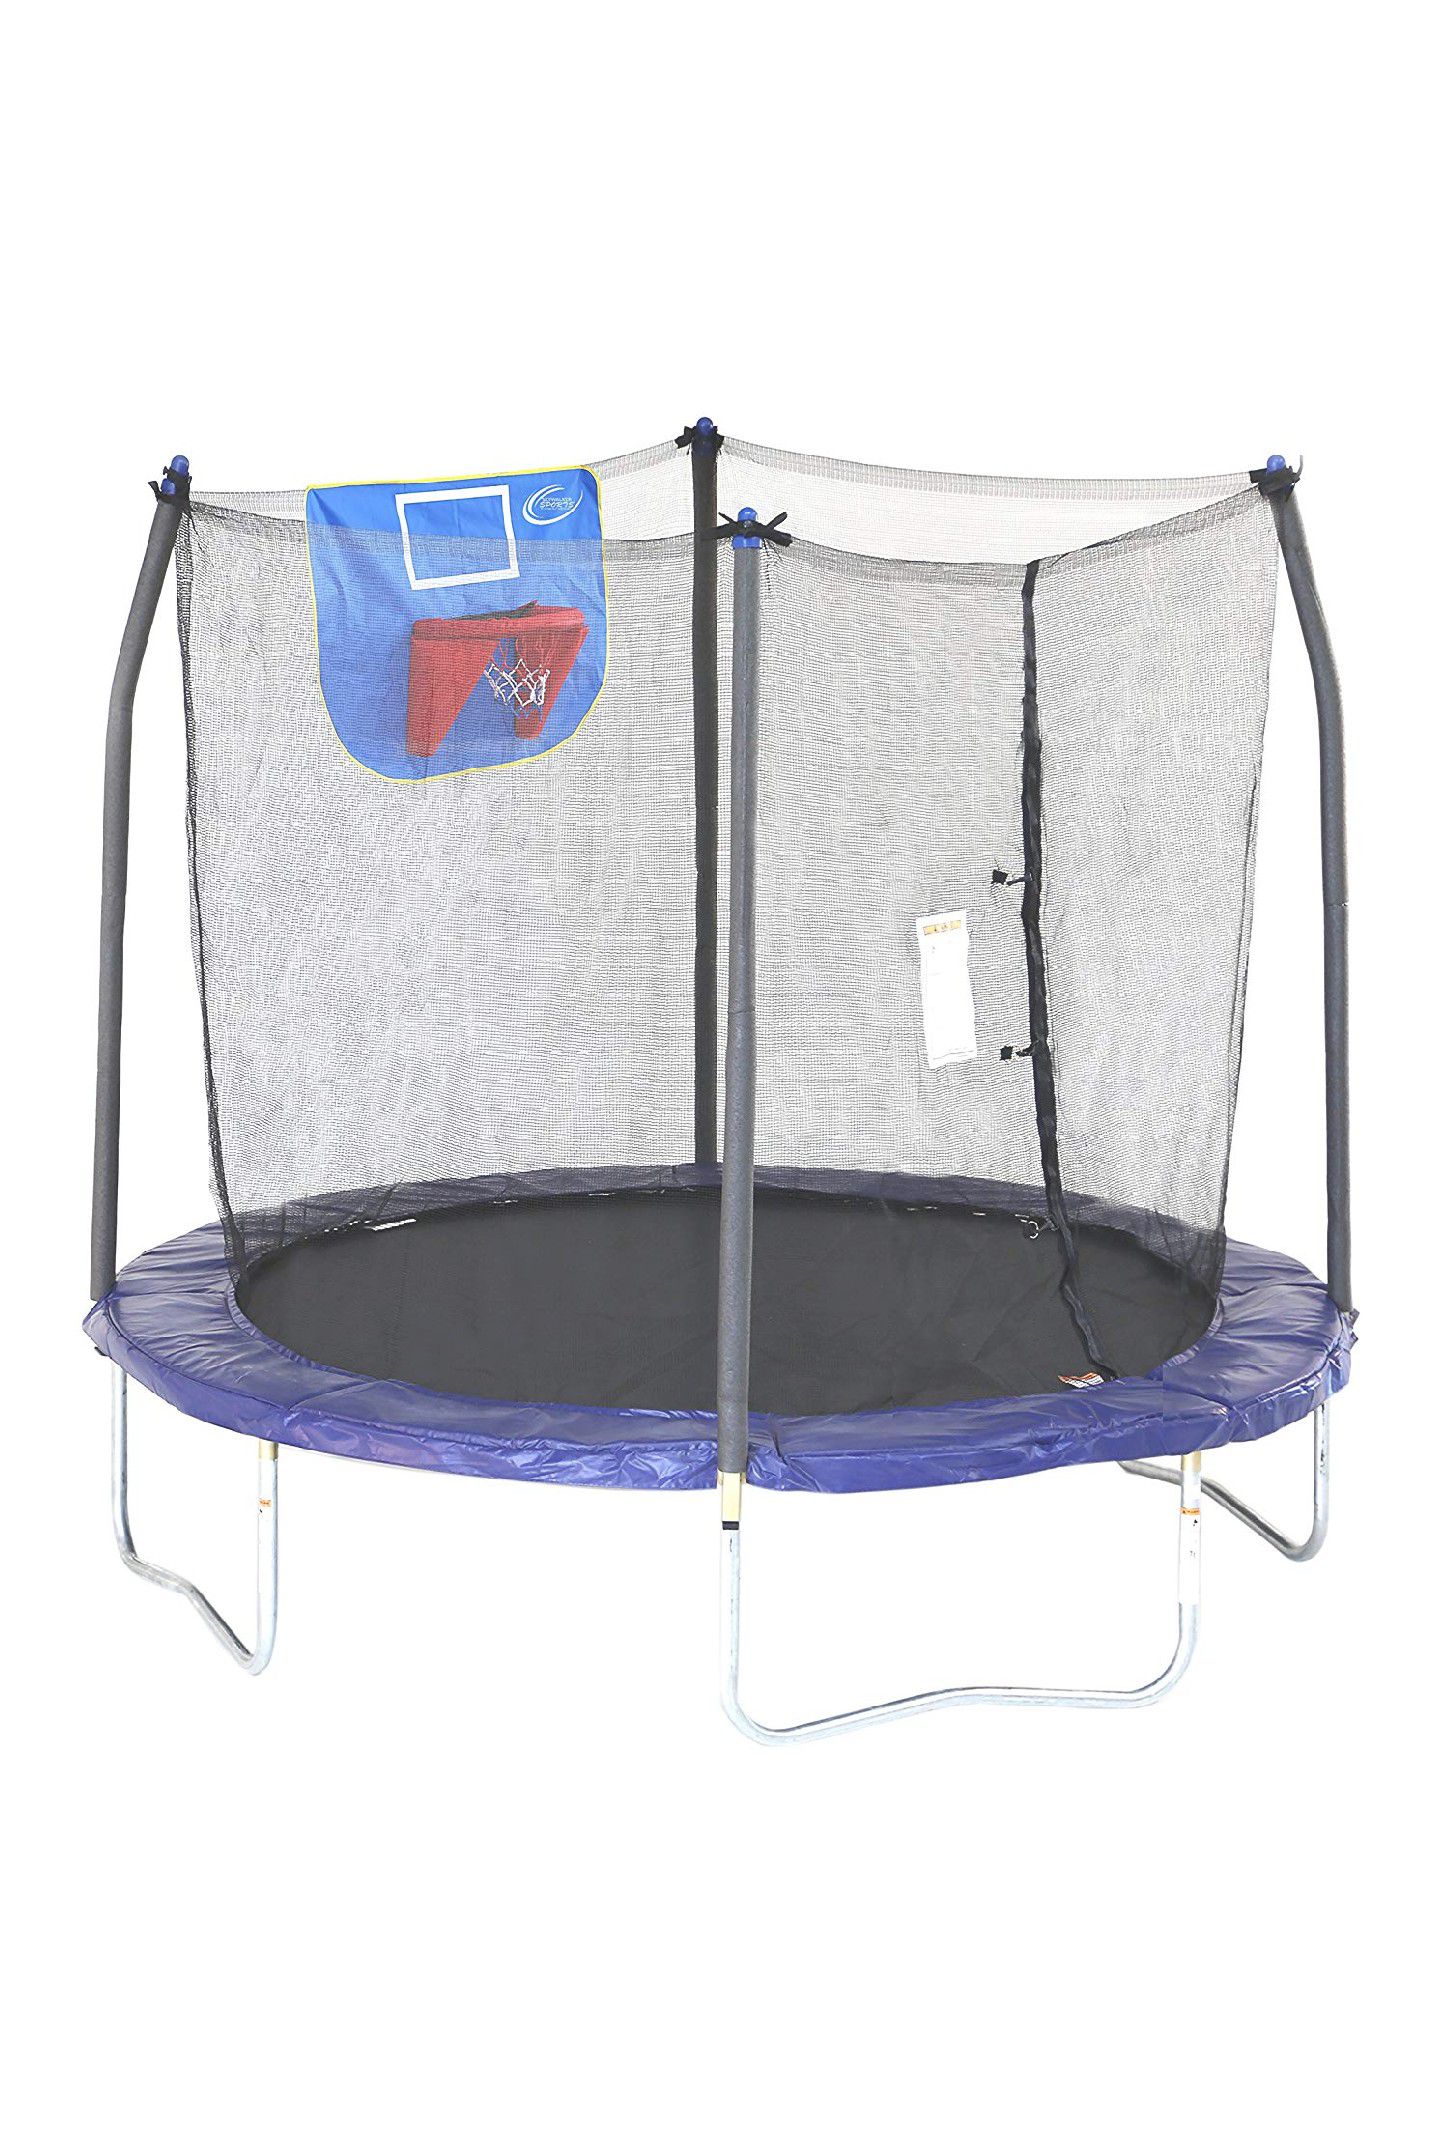 8ft trampoline with basketball hoop